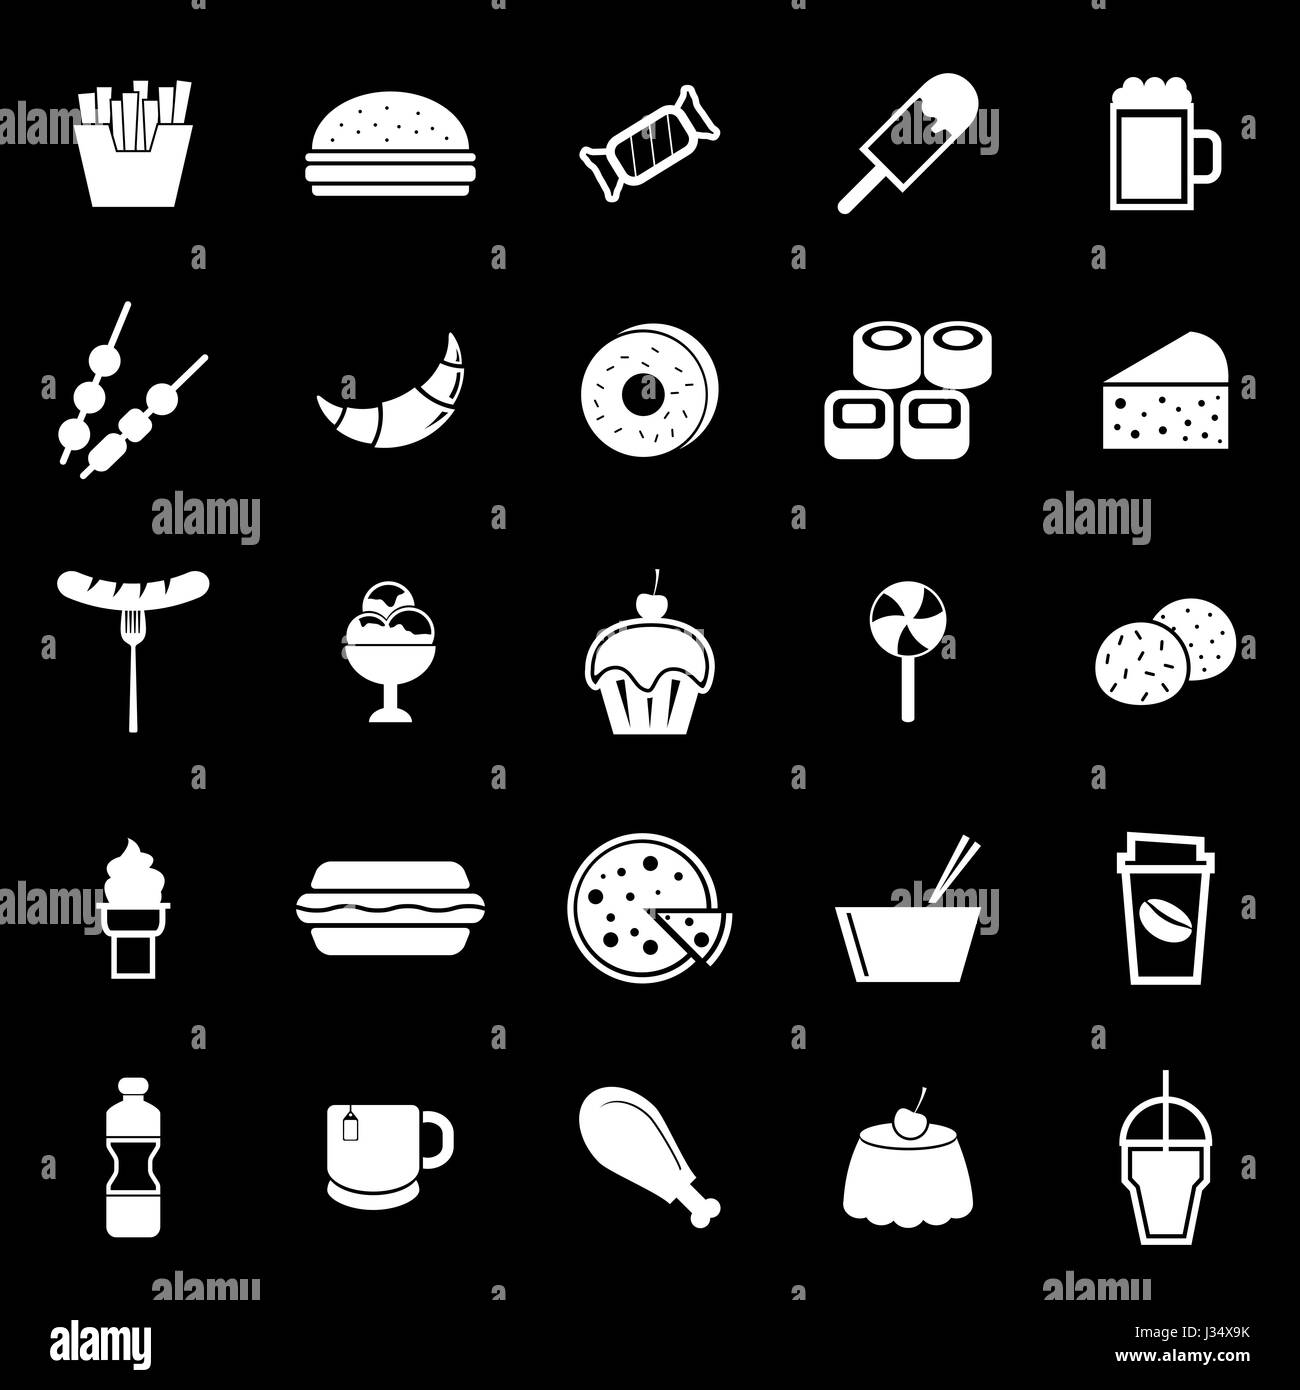 Fast food icons on black background, stock vector Stock Vector